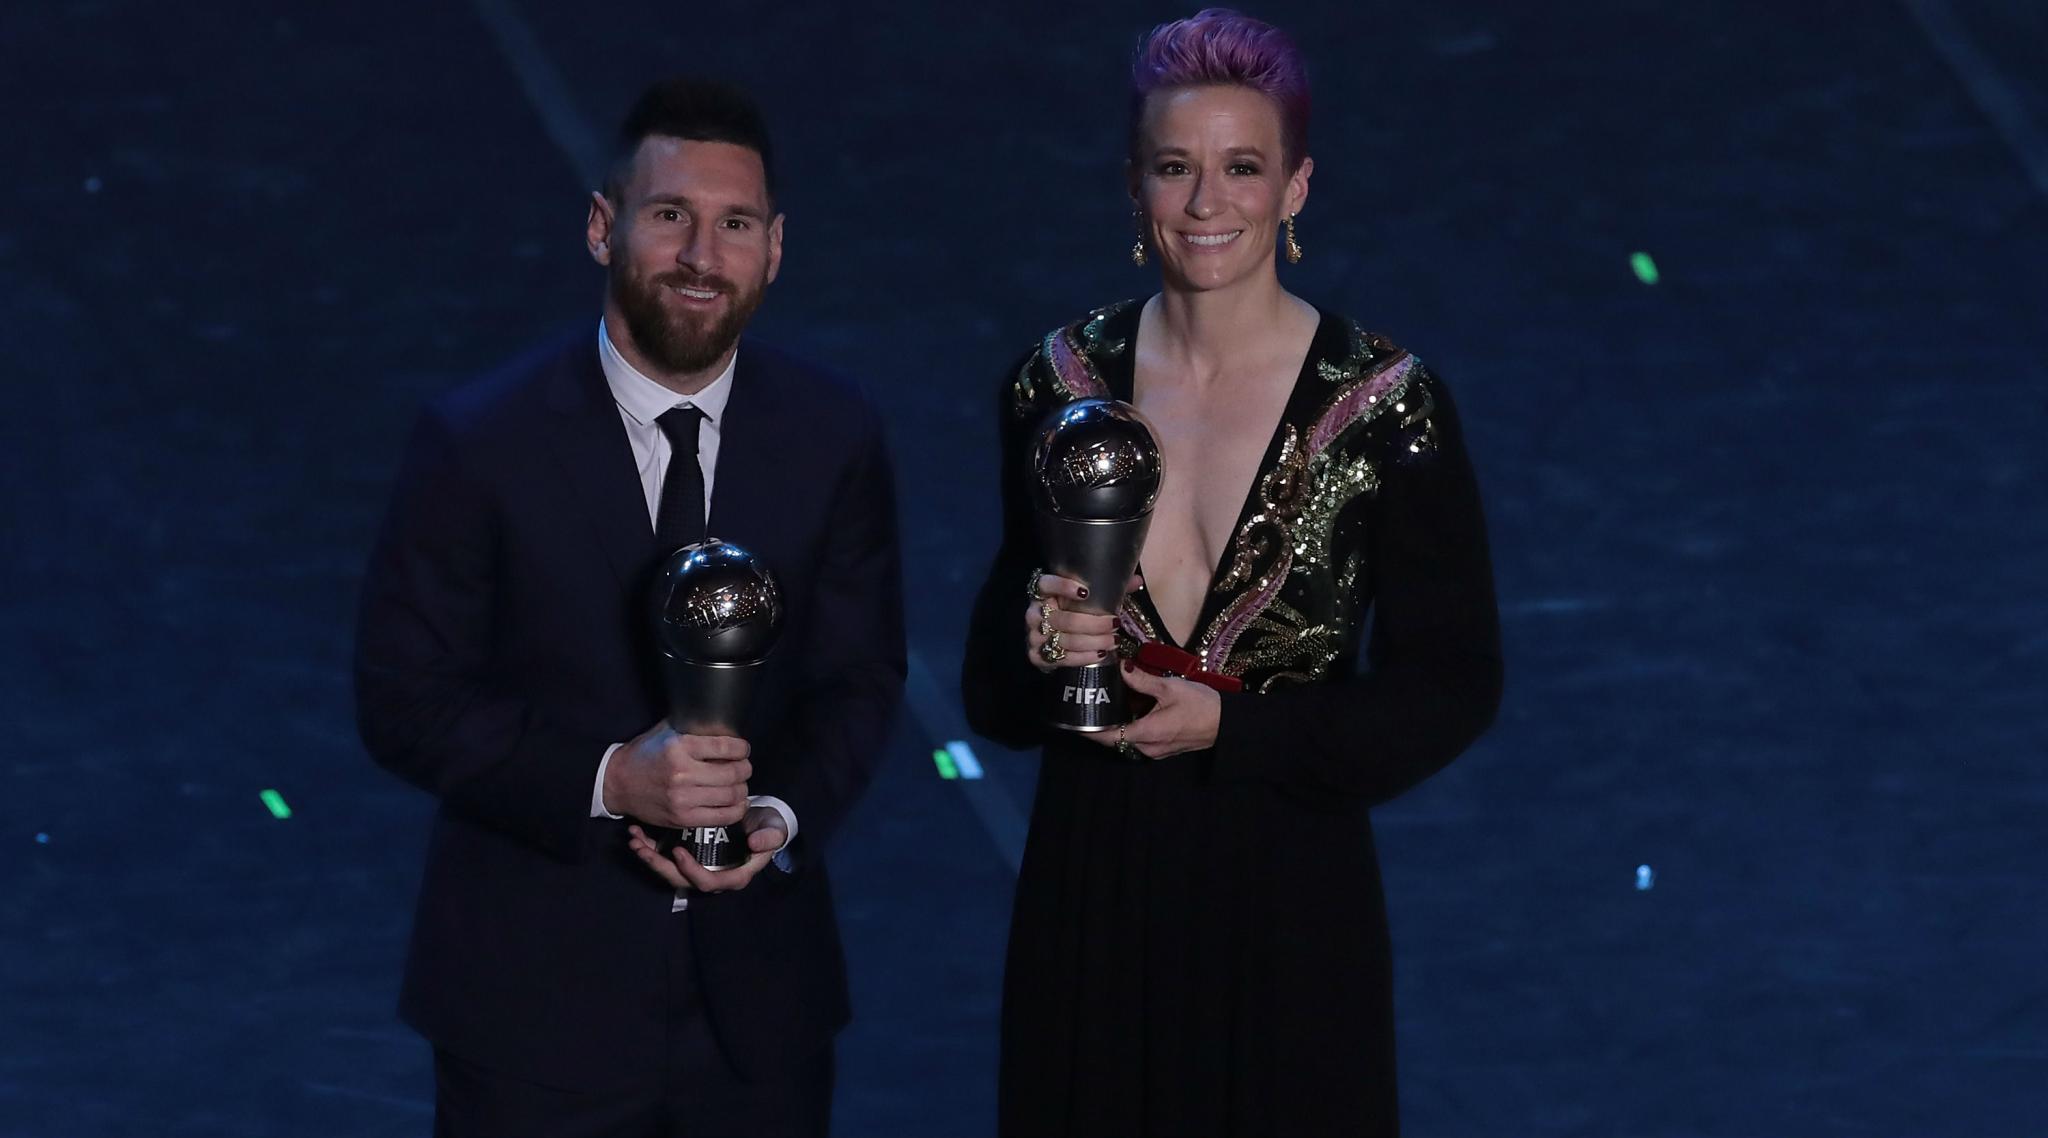 Lionel Messi Wins FIFA Men's Player of the Year Award as Cristiano Ronaldo Skips ...2048 x 1138